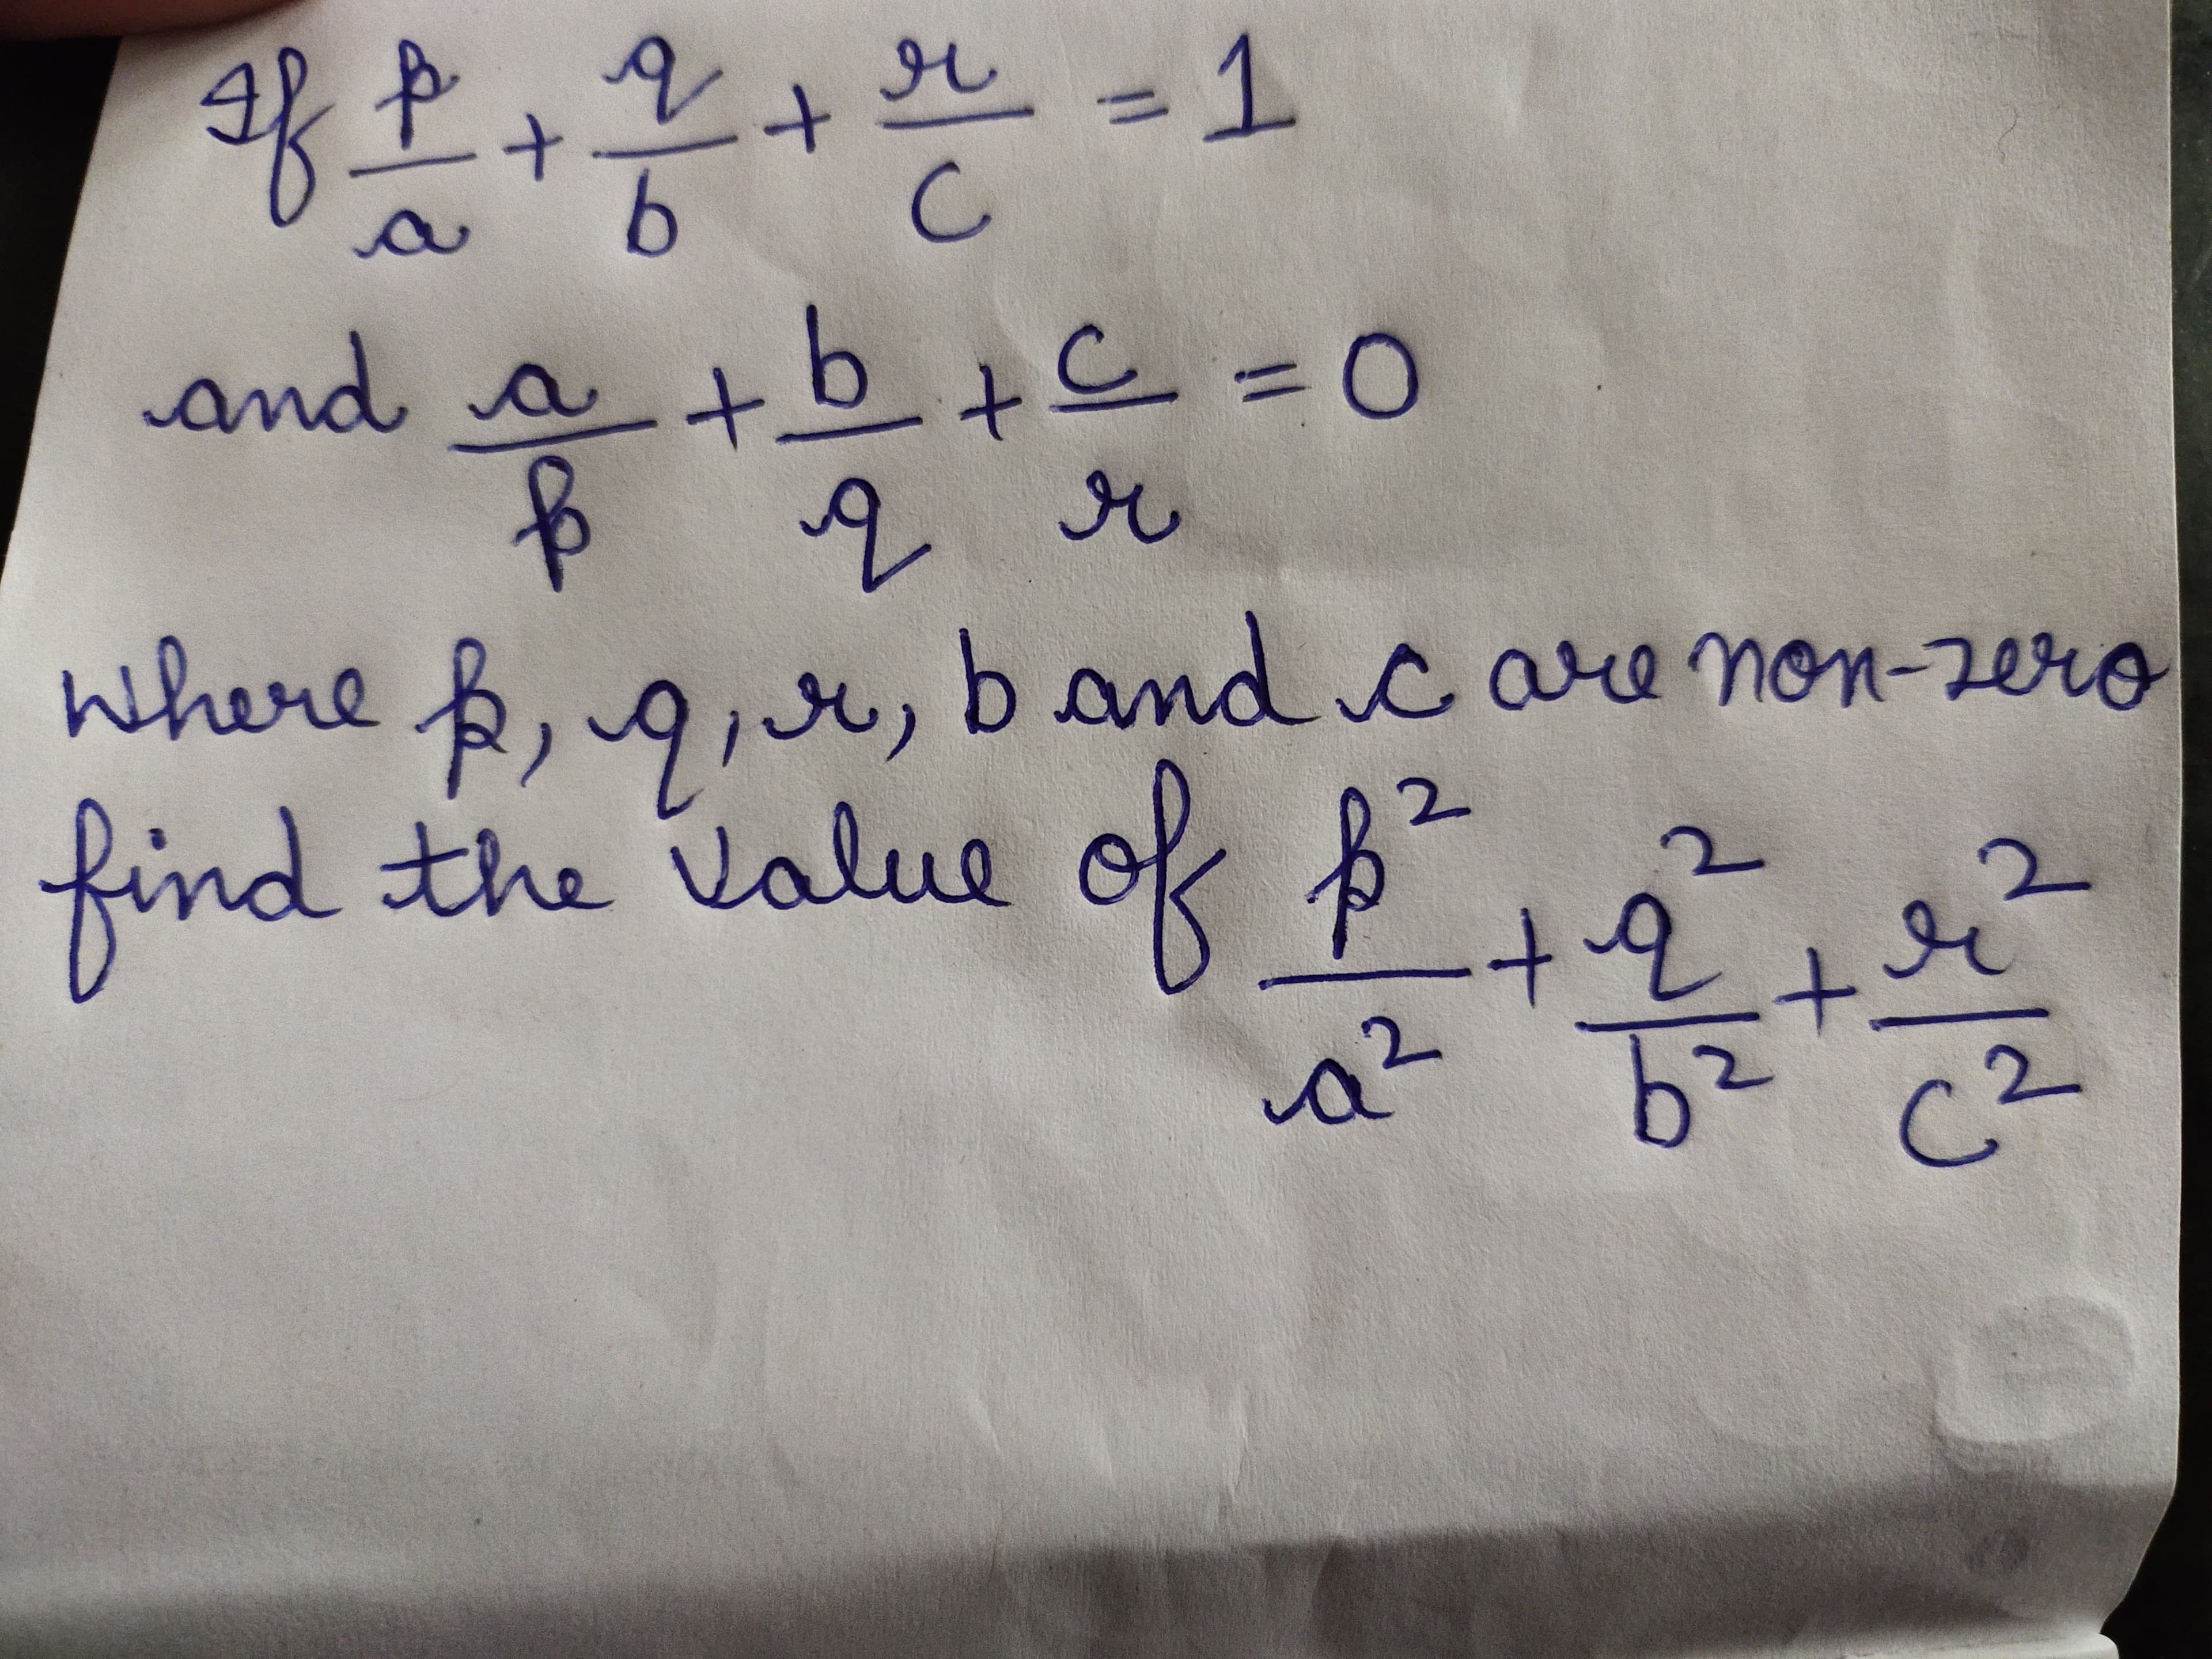 or
+
%3D
C
and atbtc=0
of
Where ,9,sr, band care non-zero
find
the Value ok 82
of*
+
a²
